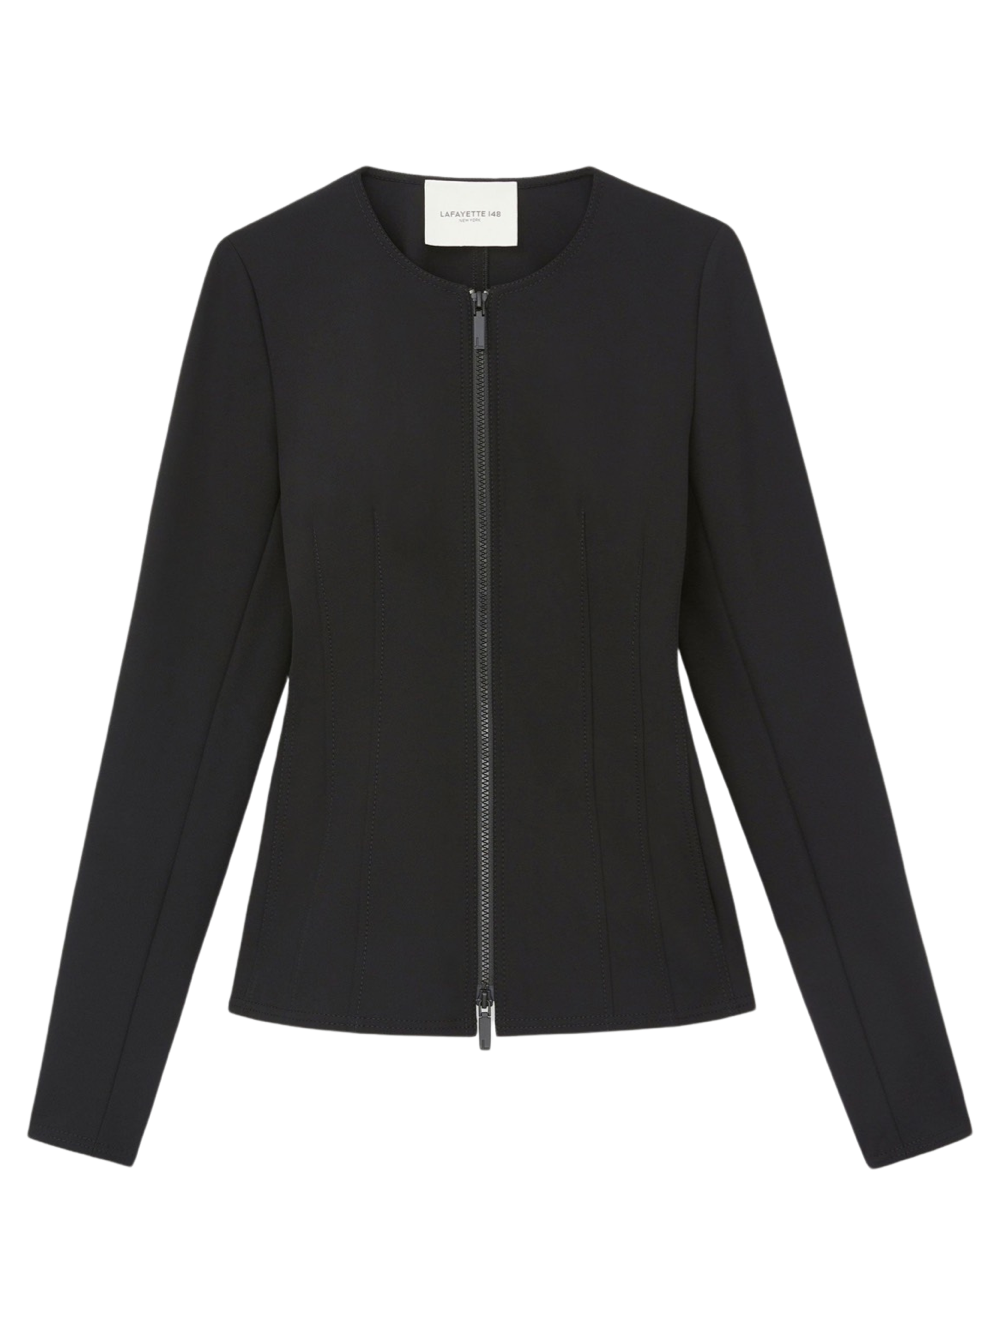 Lafayette 148 Acclaimed Stretch Zip Jacket in Black